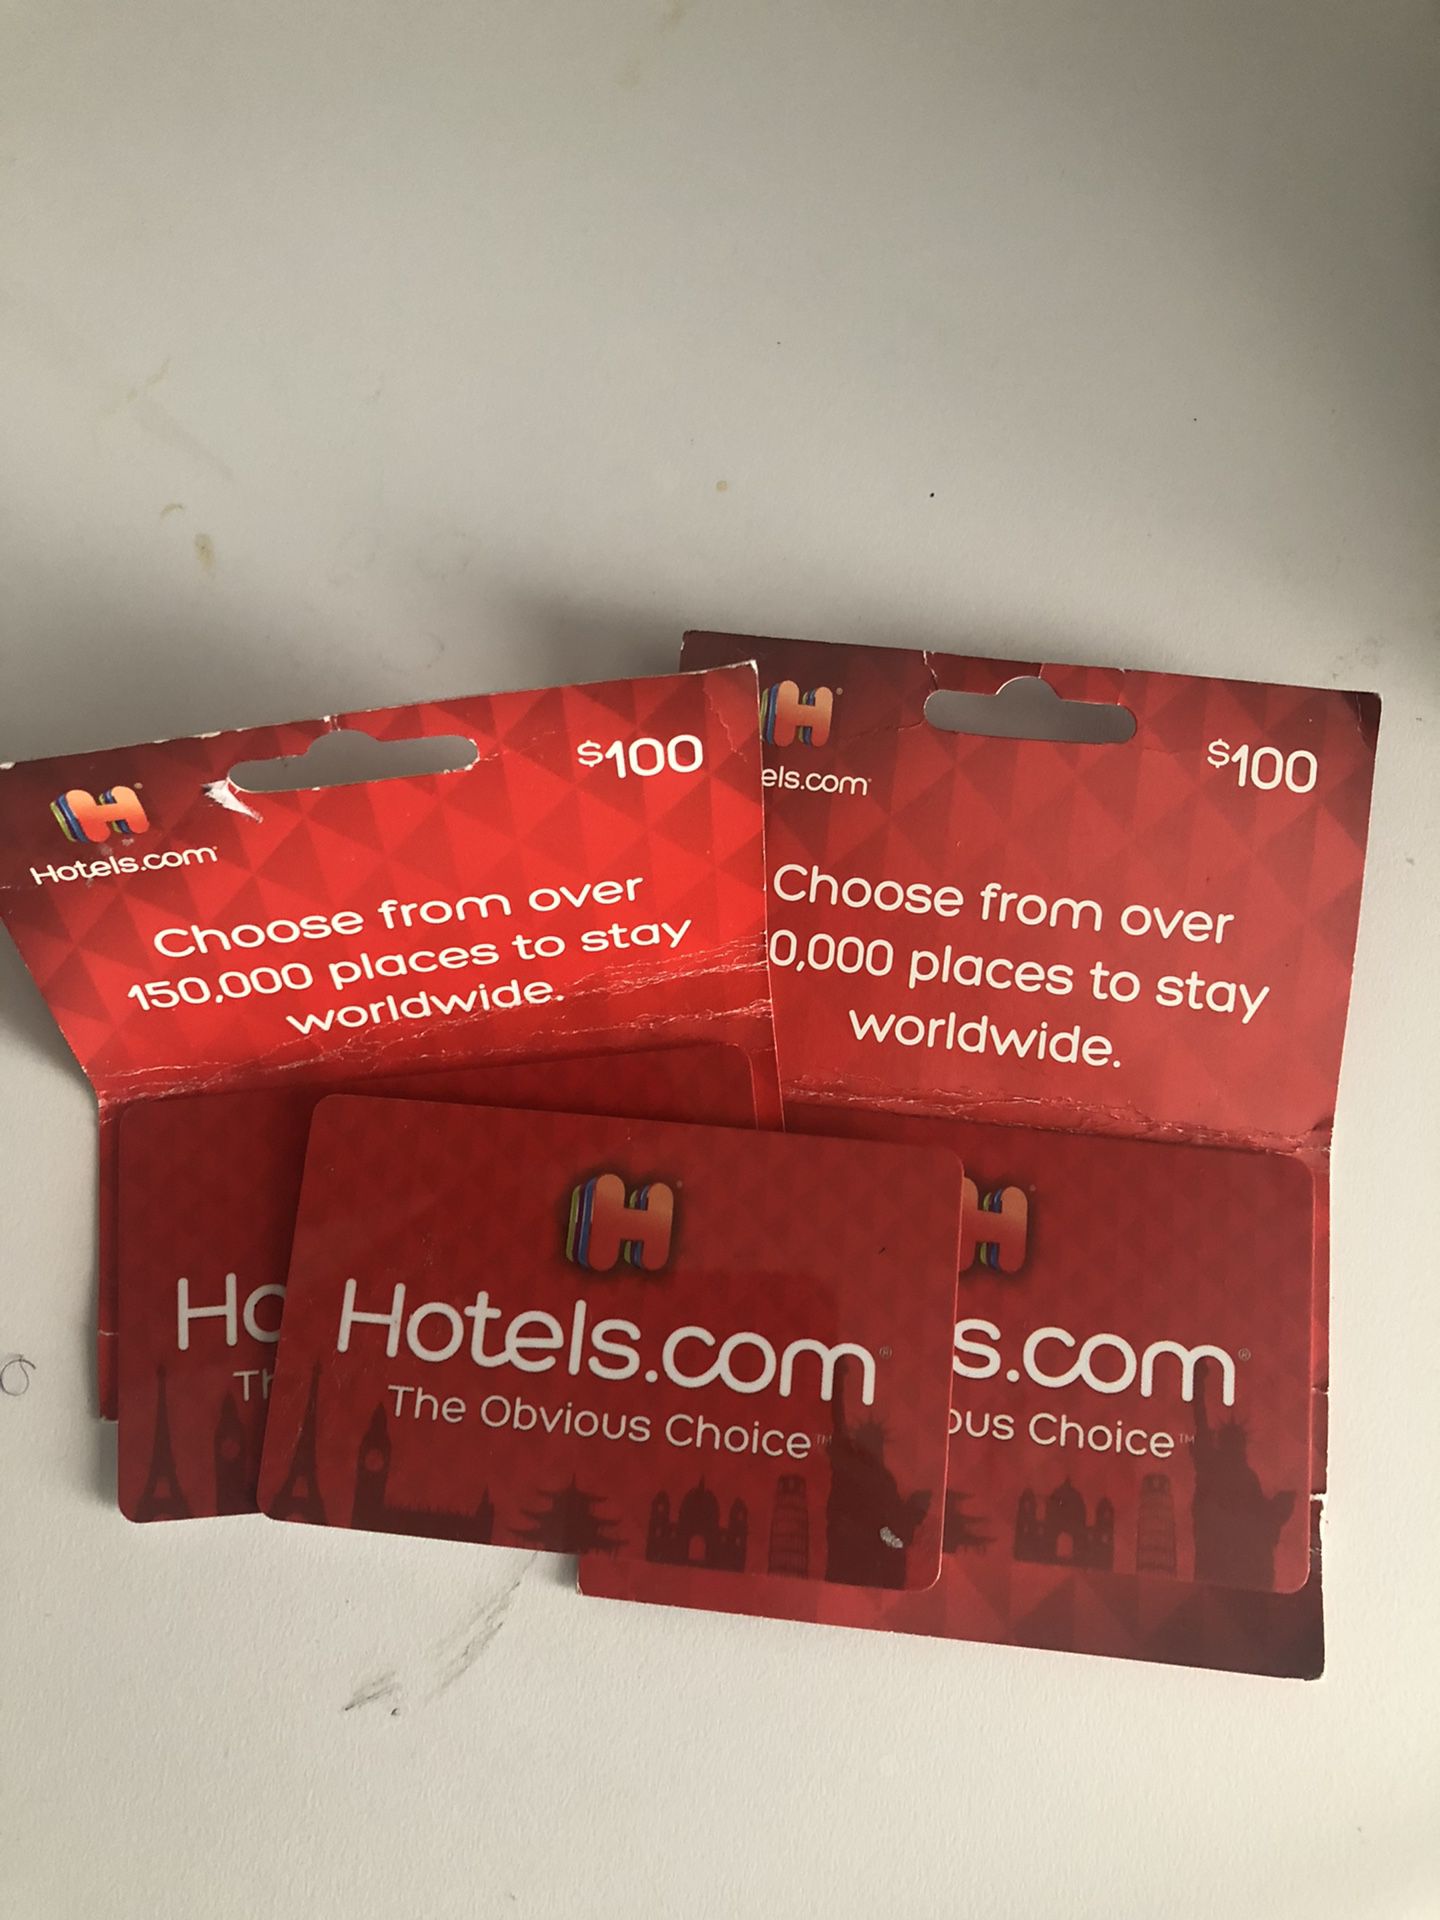 3 $100 {url removed} gift cards for $200 (letting go for $70 each)